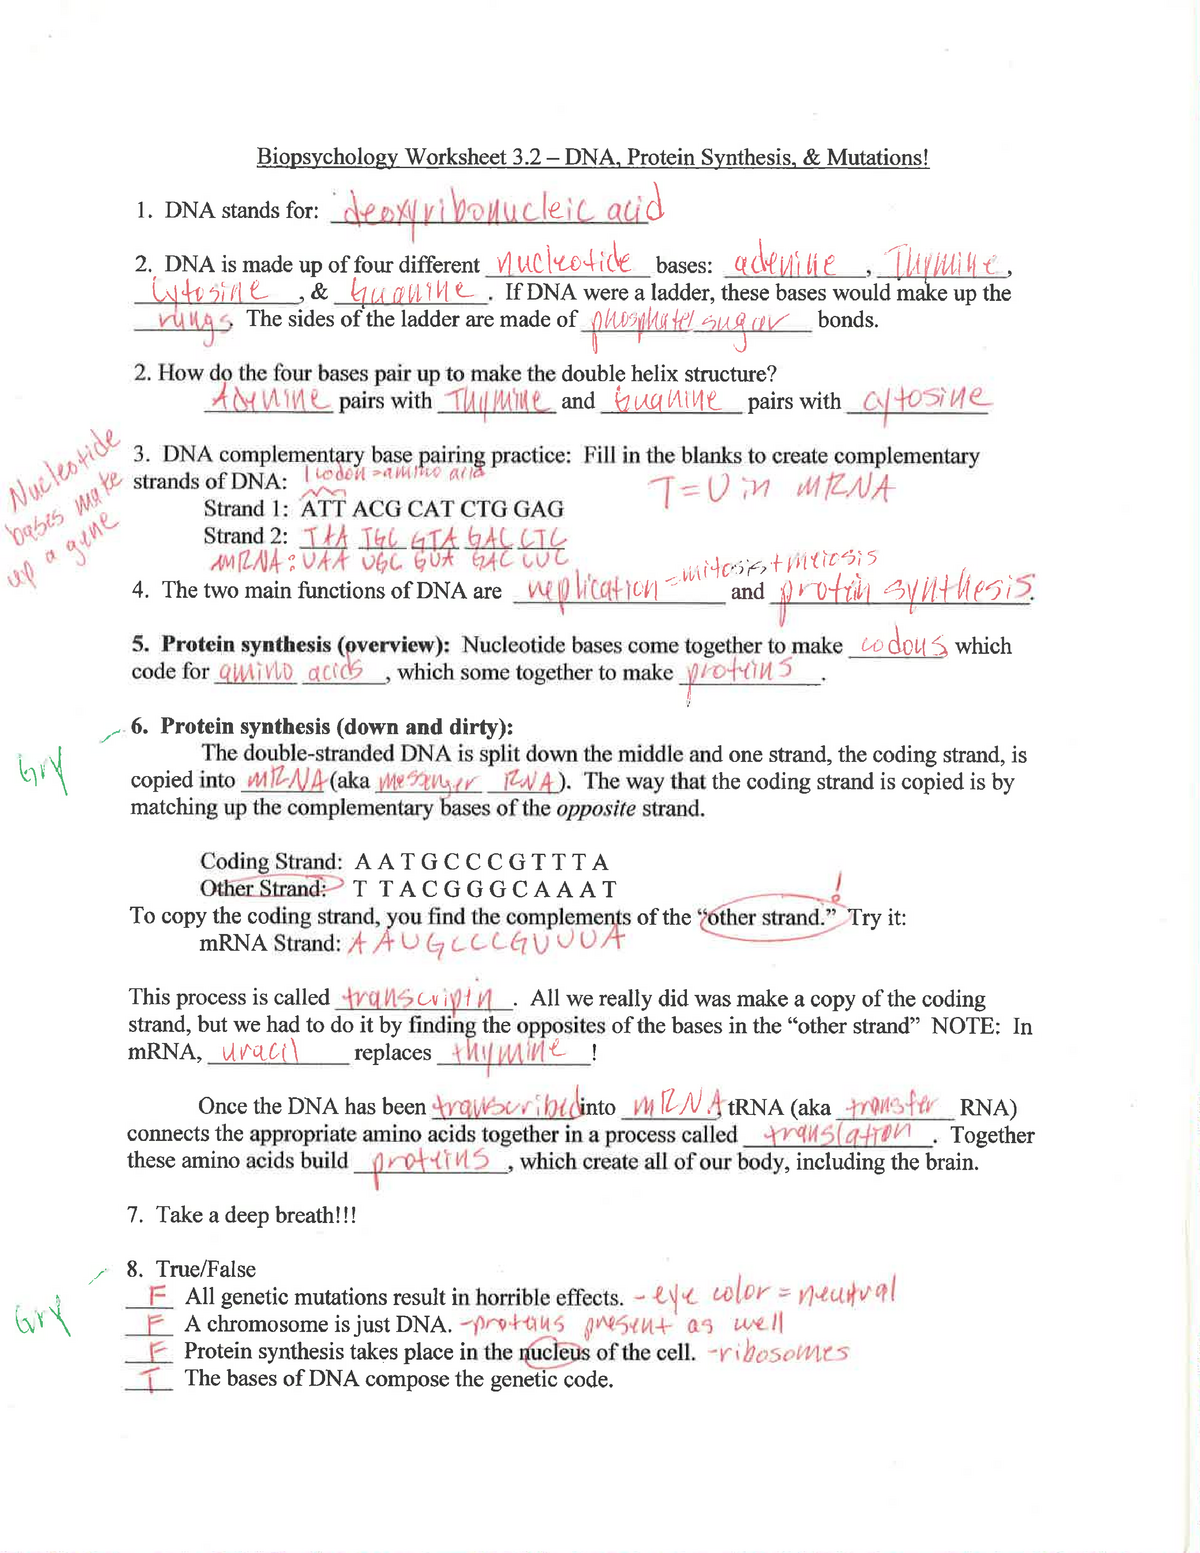 Ws 2222.22 DNA protein syn and mutations - Bio s cholo Worksheet 2222 DNA In Protein Synthesis Review Worksheet